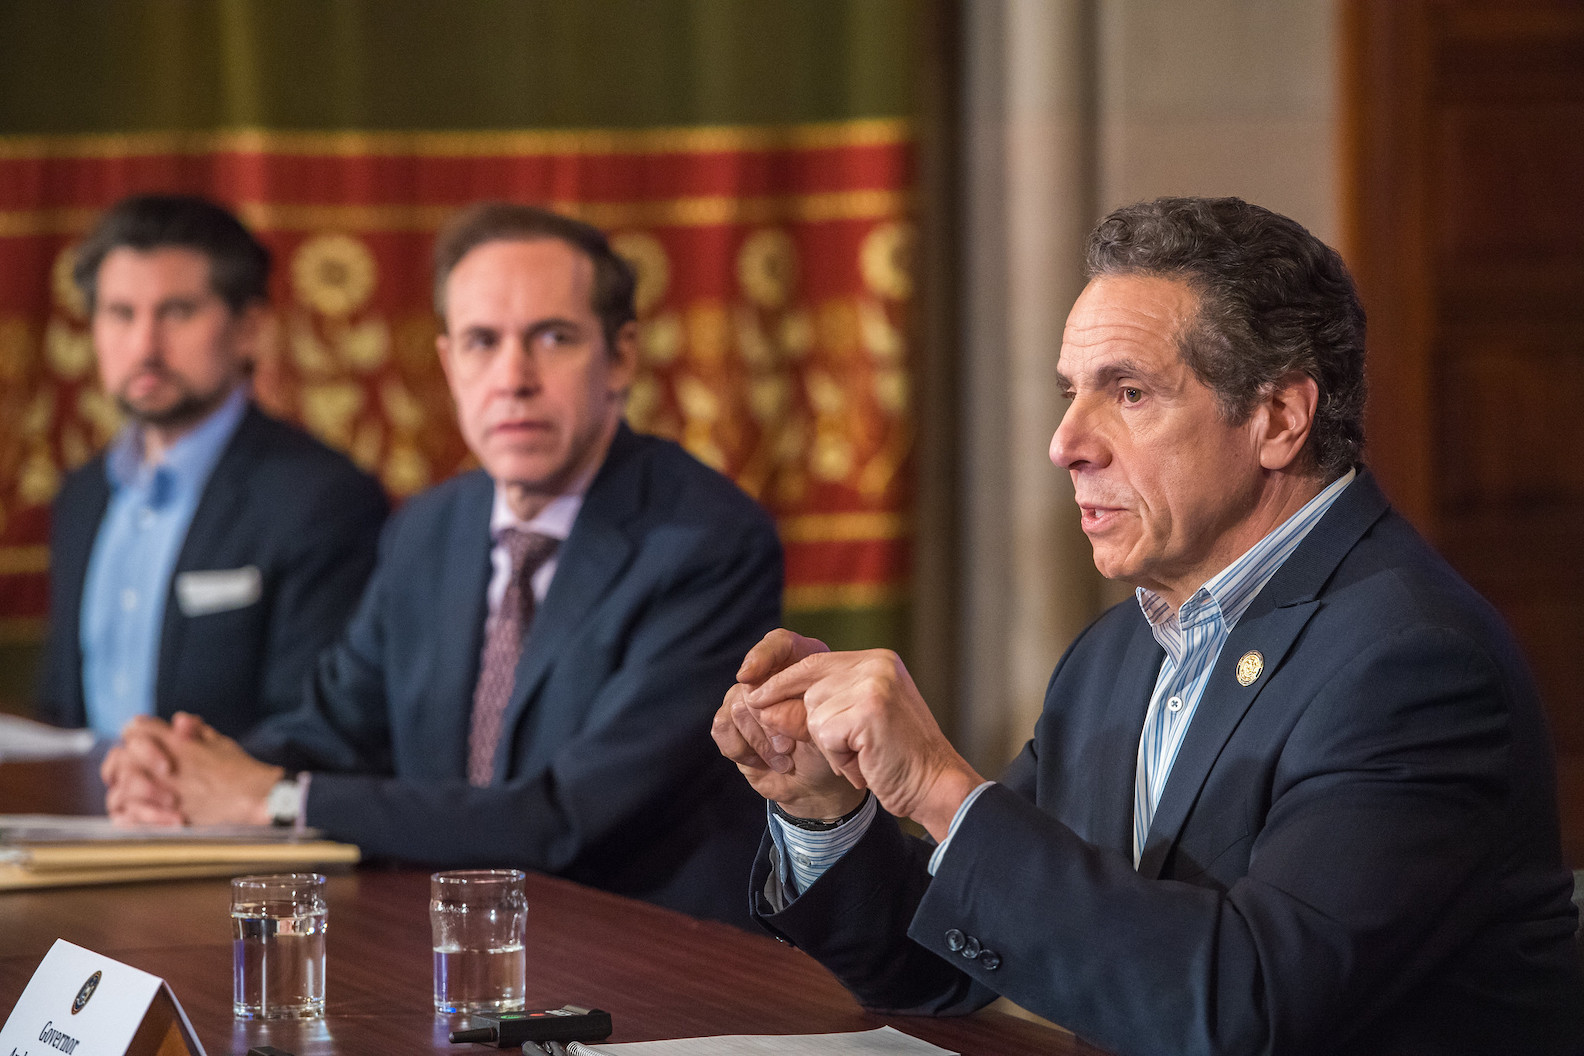 Gov. Andrew Cuomo delivers his daily press briefing on coronavirus in the Red Room of Capitol (Photo by Darren McGee/Office of Gov. Andrew M. Cuomo)